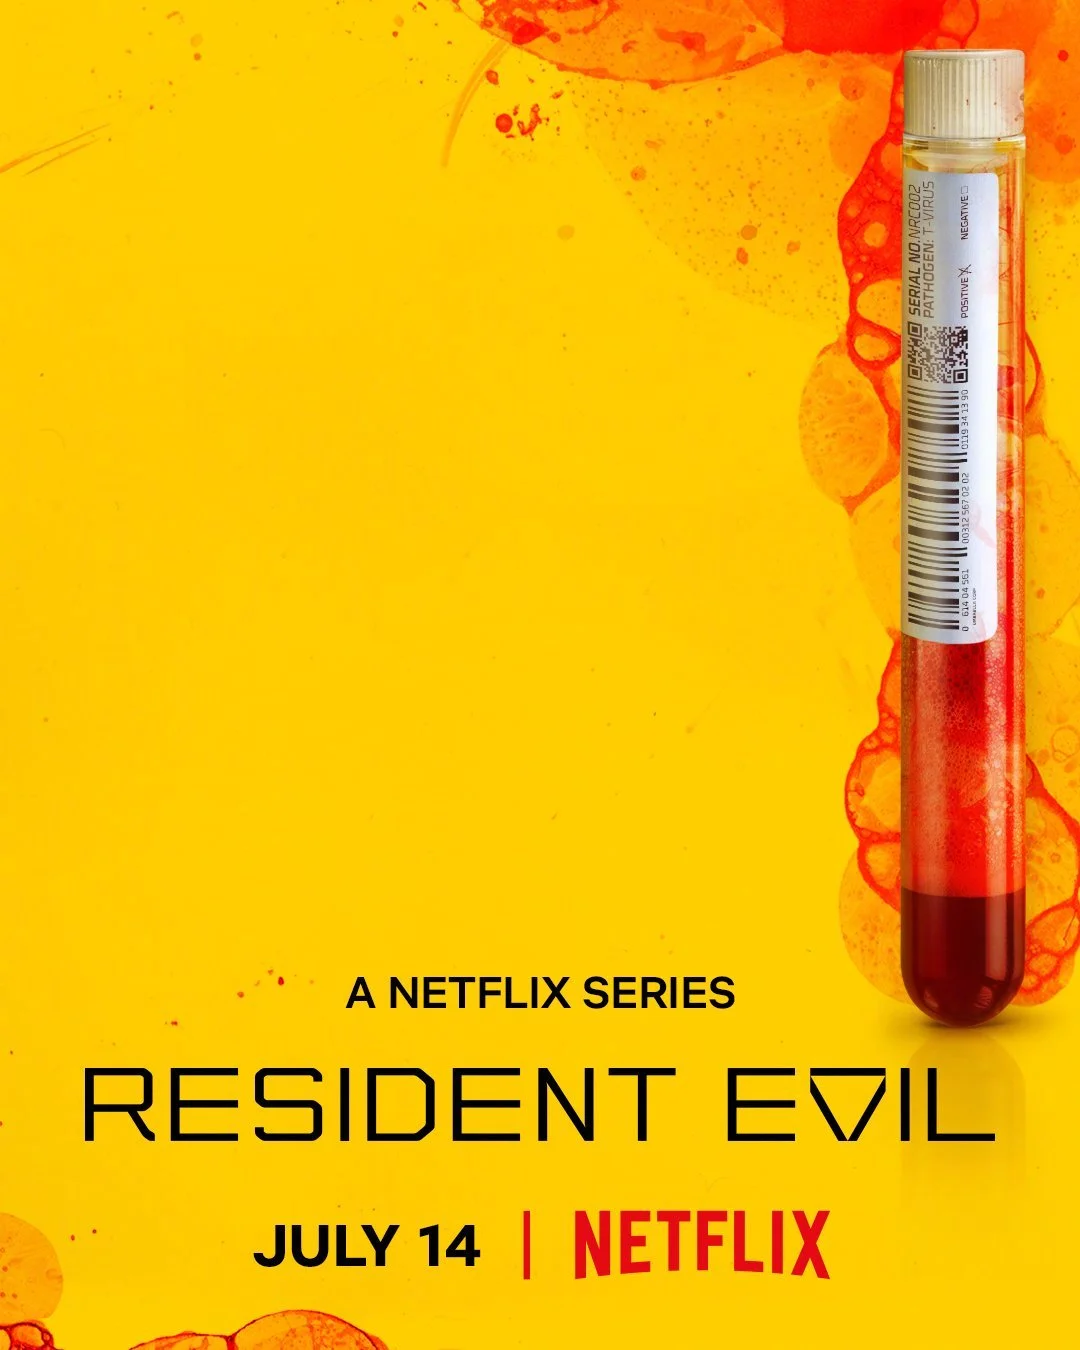 Netflix's live-action series of 'Resident Evil' releases posters, it will go live on July 14 this year